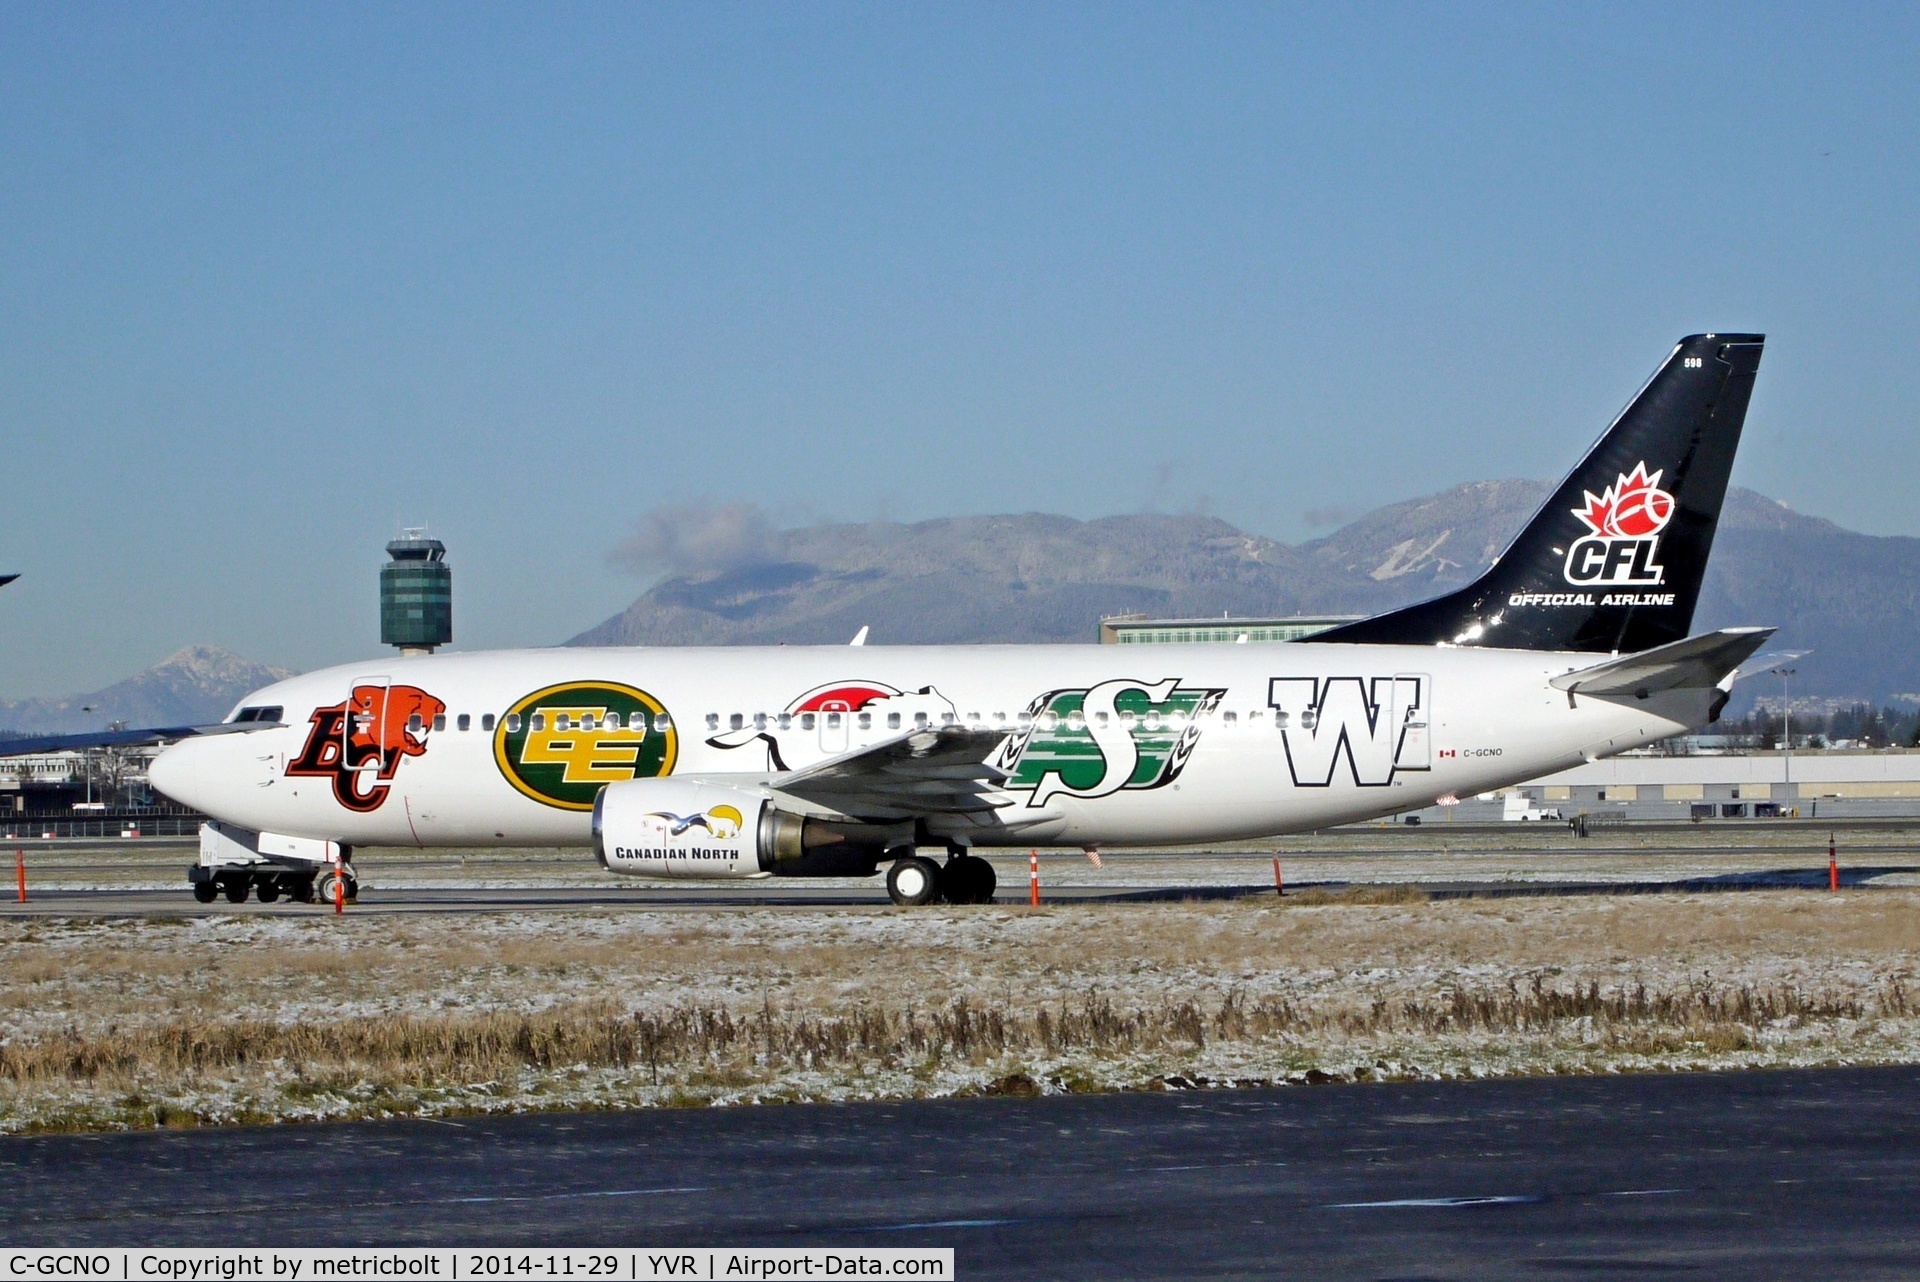 C-GCNO, 1999 Boeing 737-36N C/N 28596, In Vancouver for the Grey Cup.
From left to right: BC Lions,Edmonton Eskimos,Calgary Stampeders,Saskatchewan Roughriders and Winnipeg Blue Bombers.